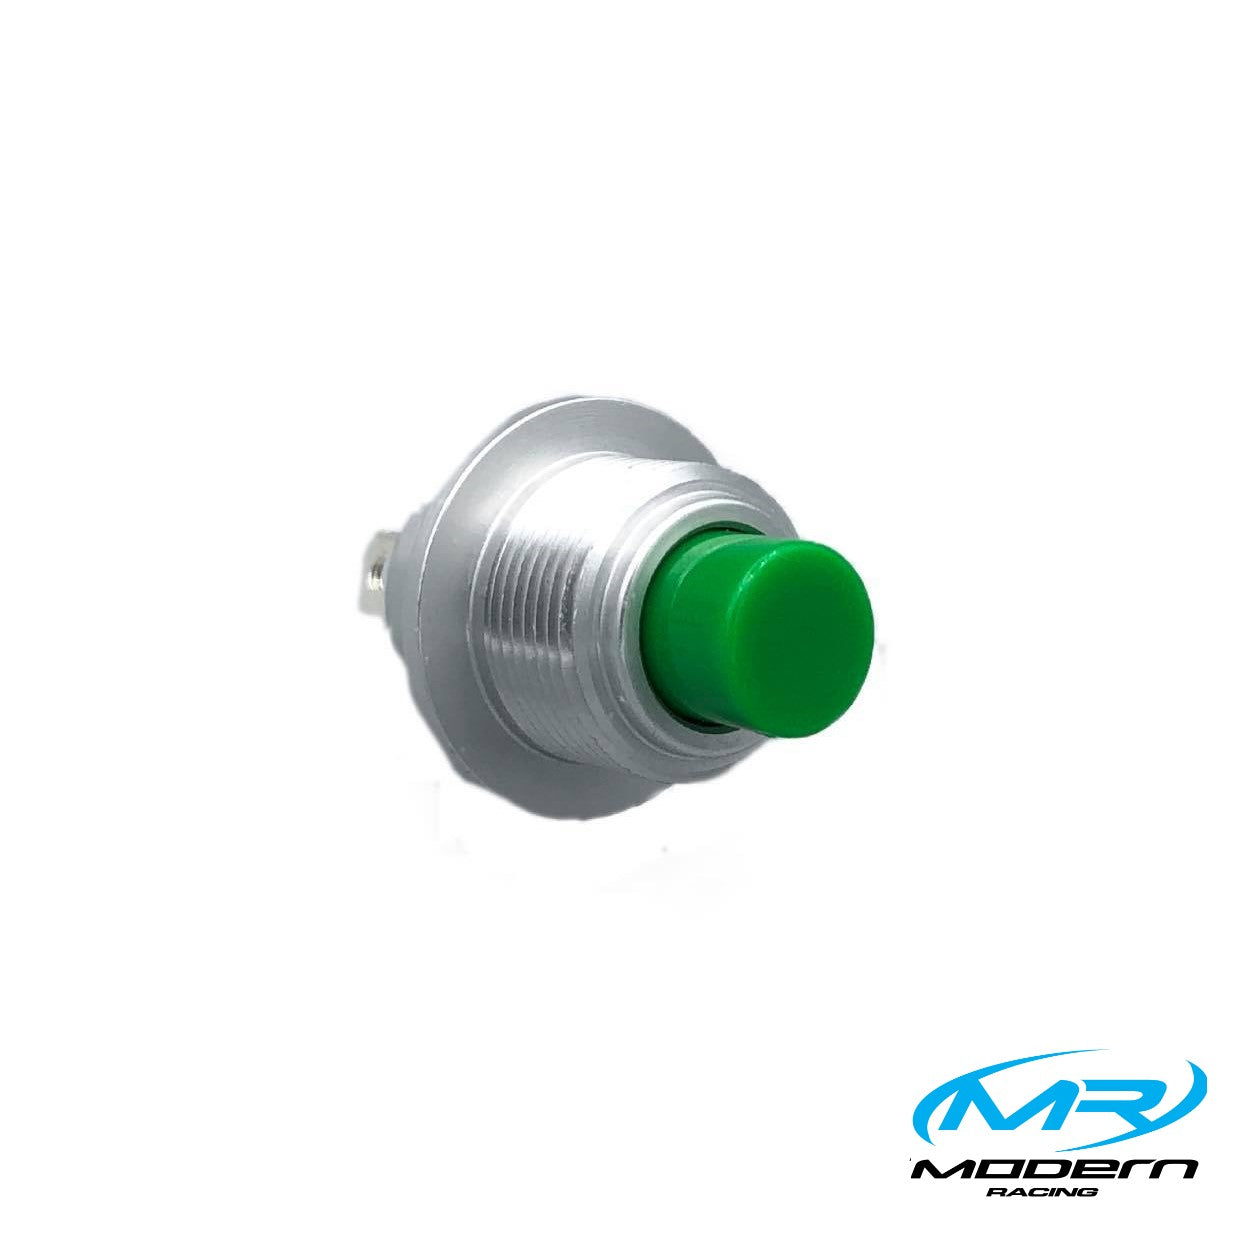 Momentary Push Button Switch. Green